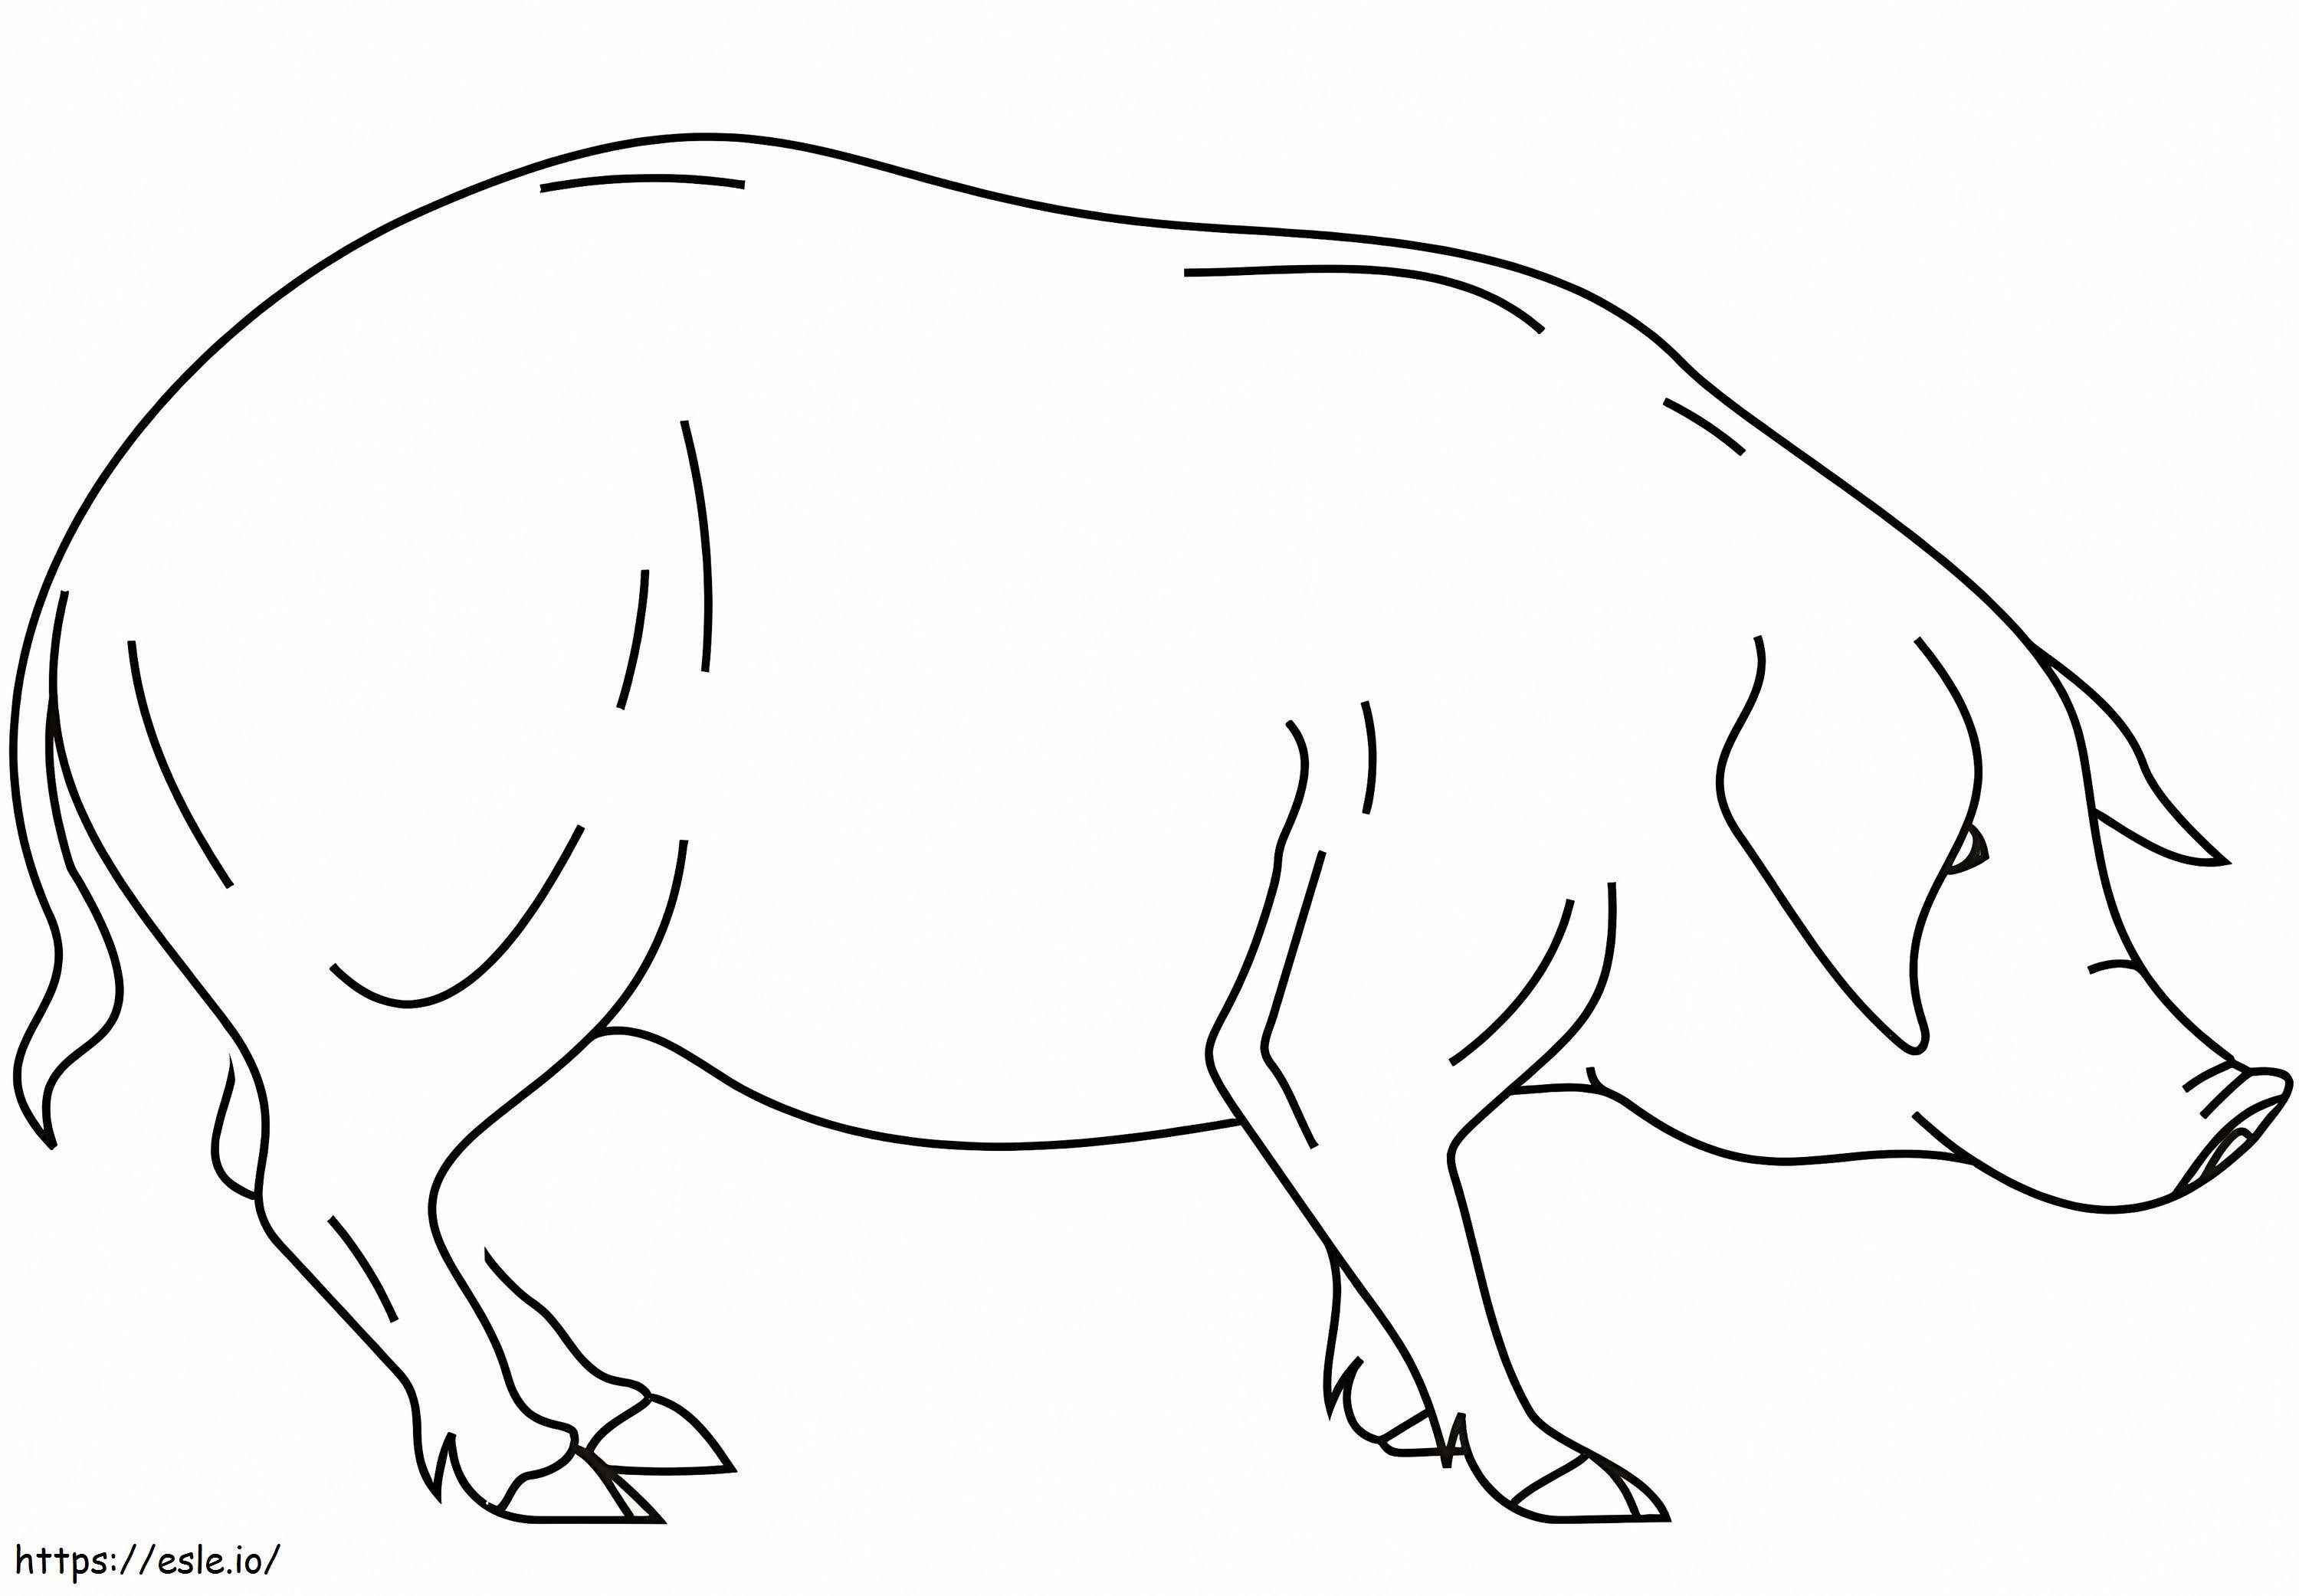 Normal Pig 1 coloring page